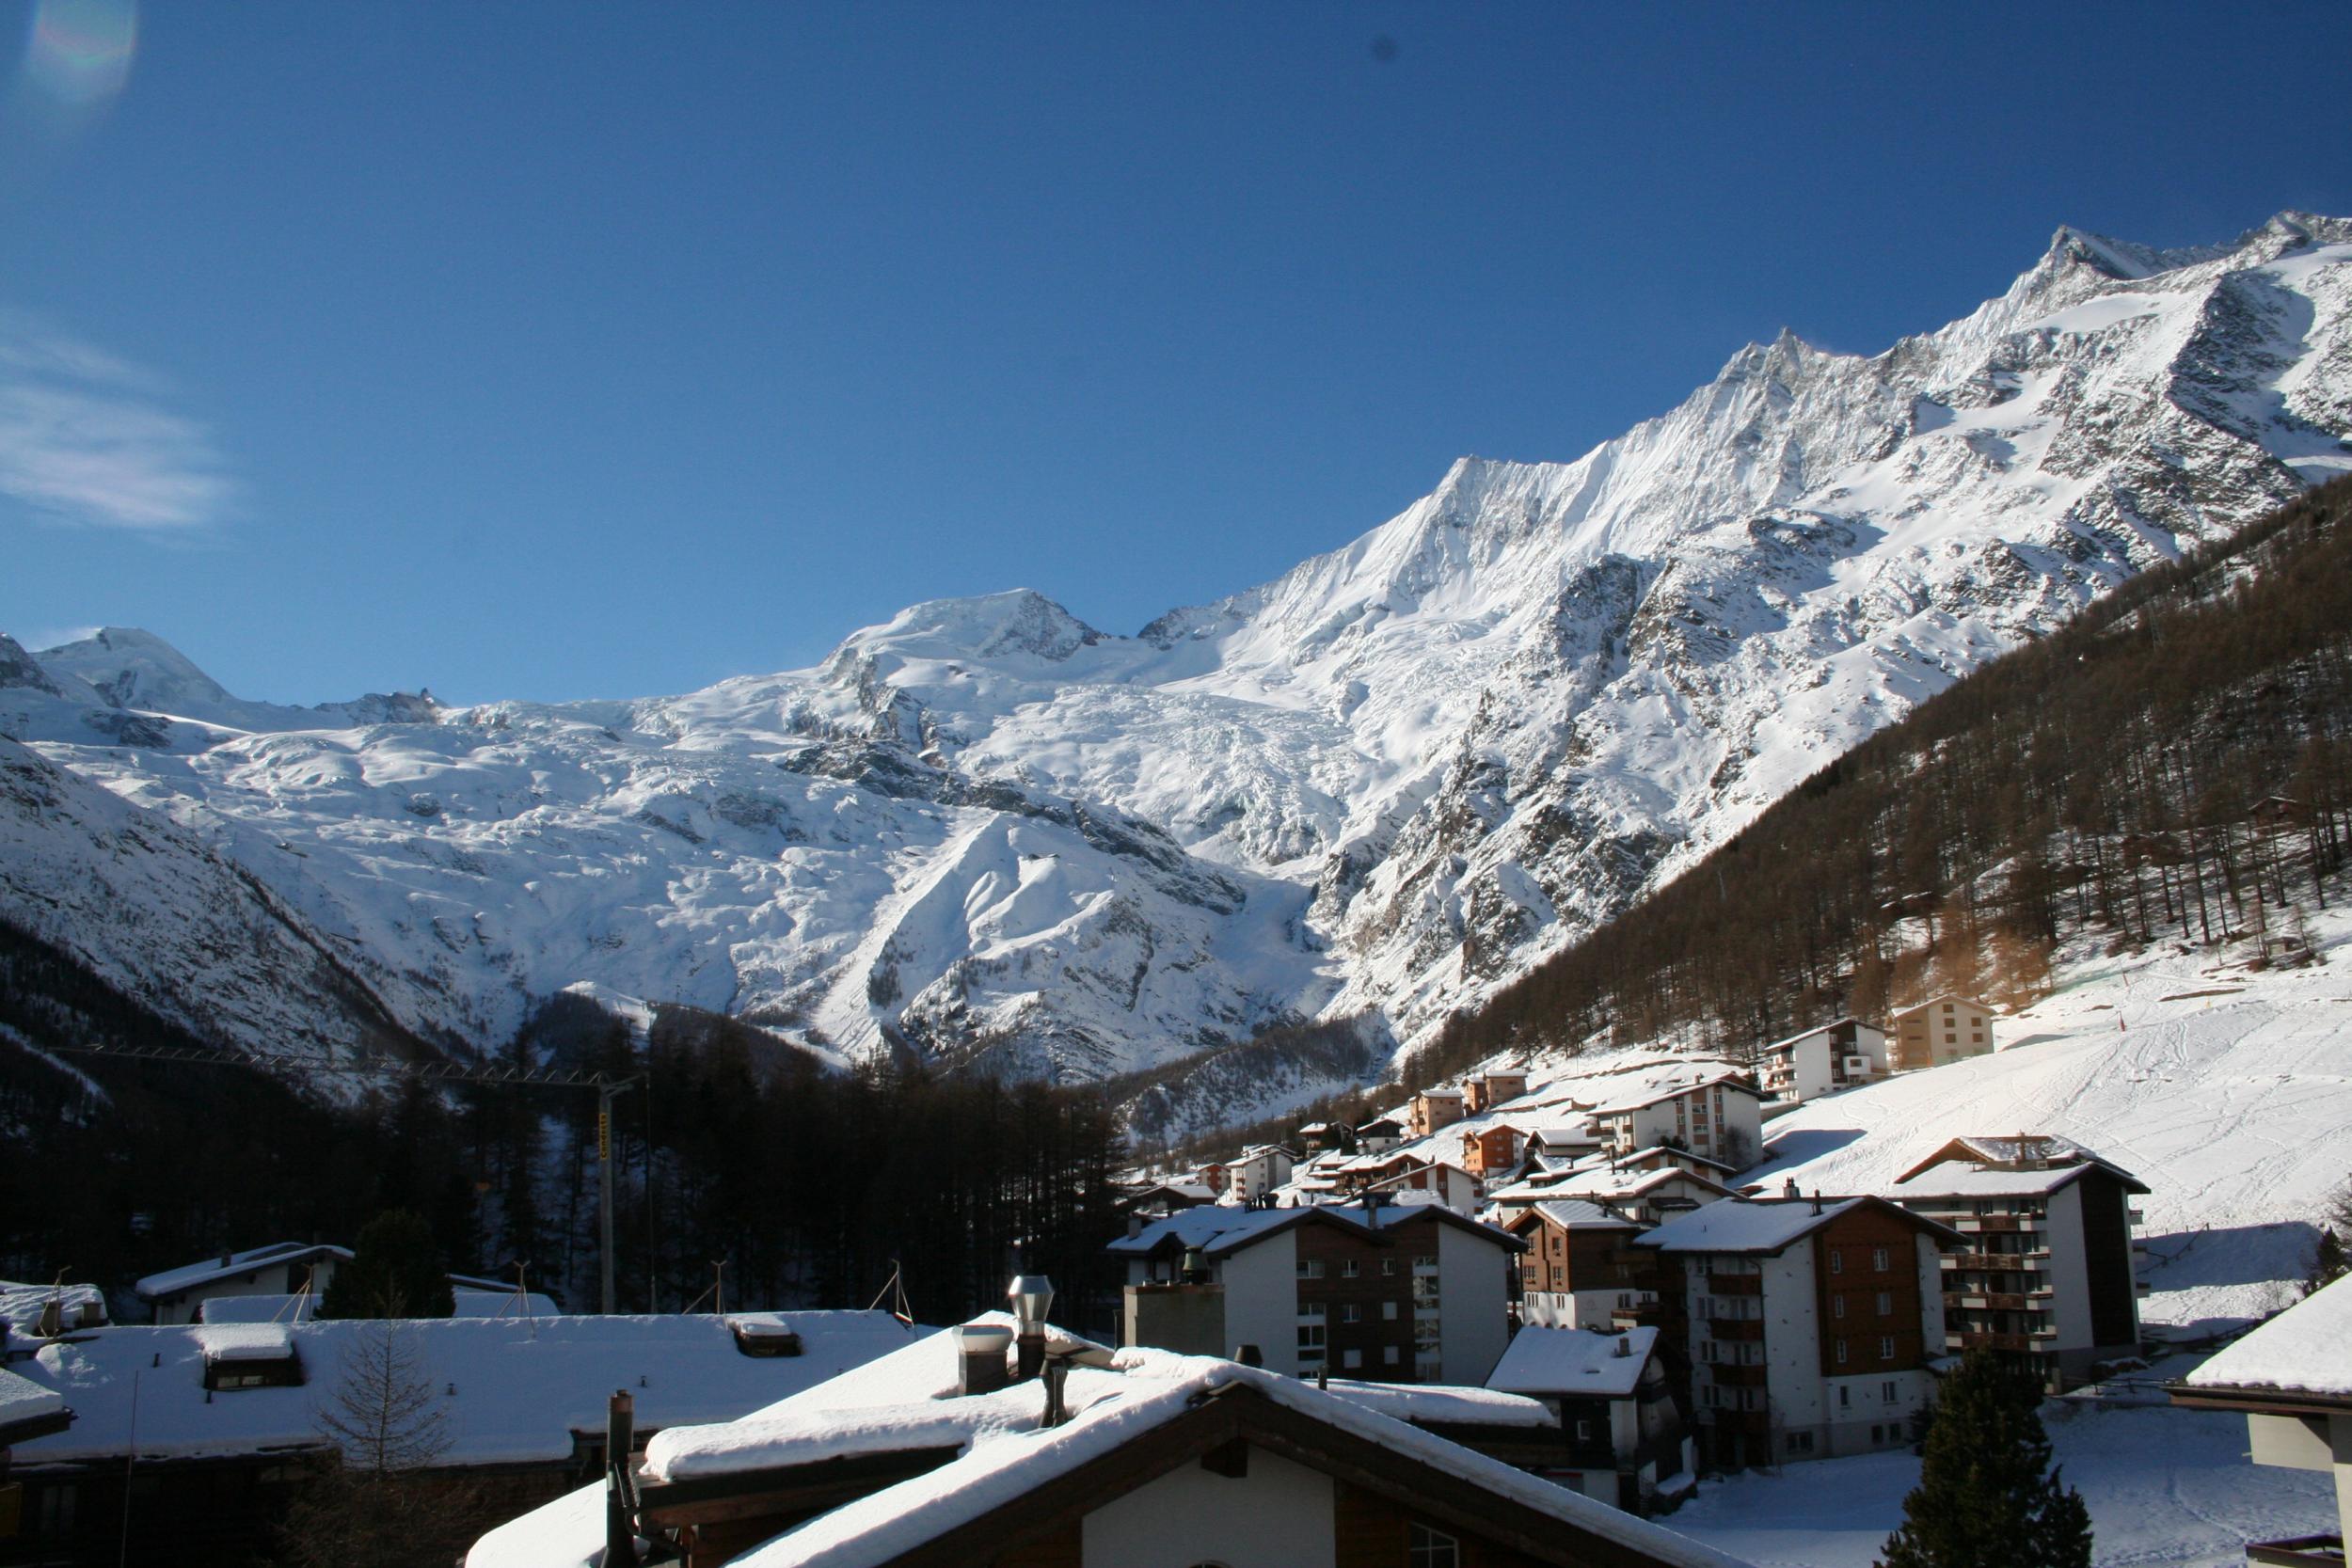 Saas Fee offers high, snowsure slopes